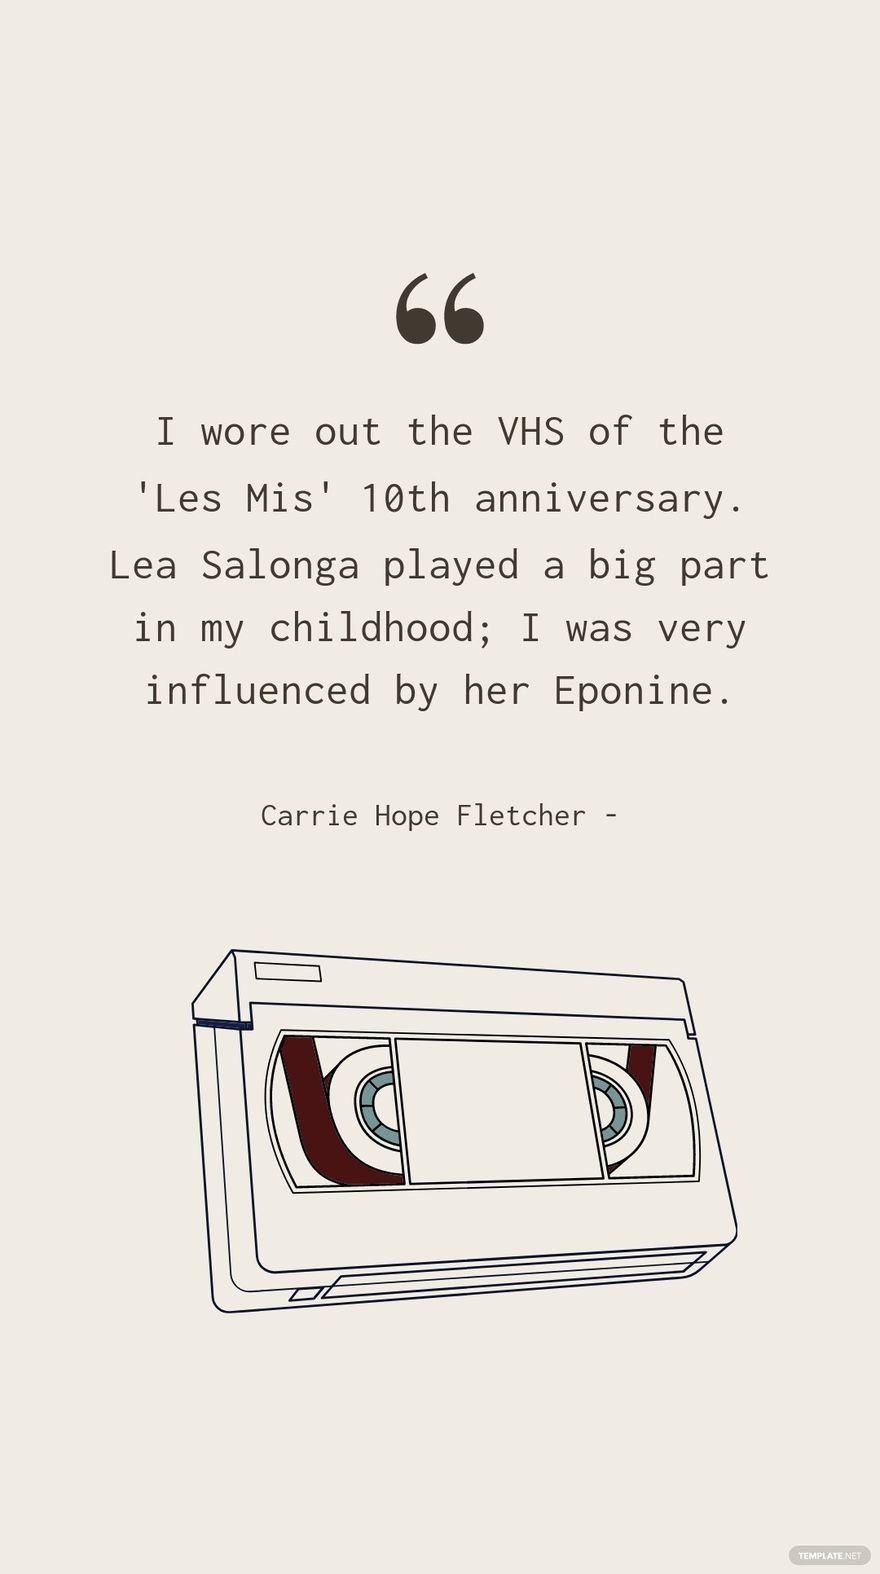 Carrie Hope Fletcher - I wore out the VHS of the 'Les Mis' 10th anniversary. Lea Salonga played a big part in my childhood; I was very influenced by her Eponine. in JPG